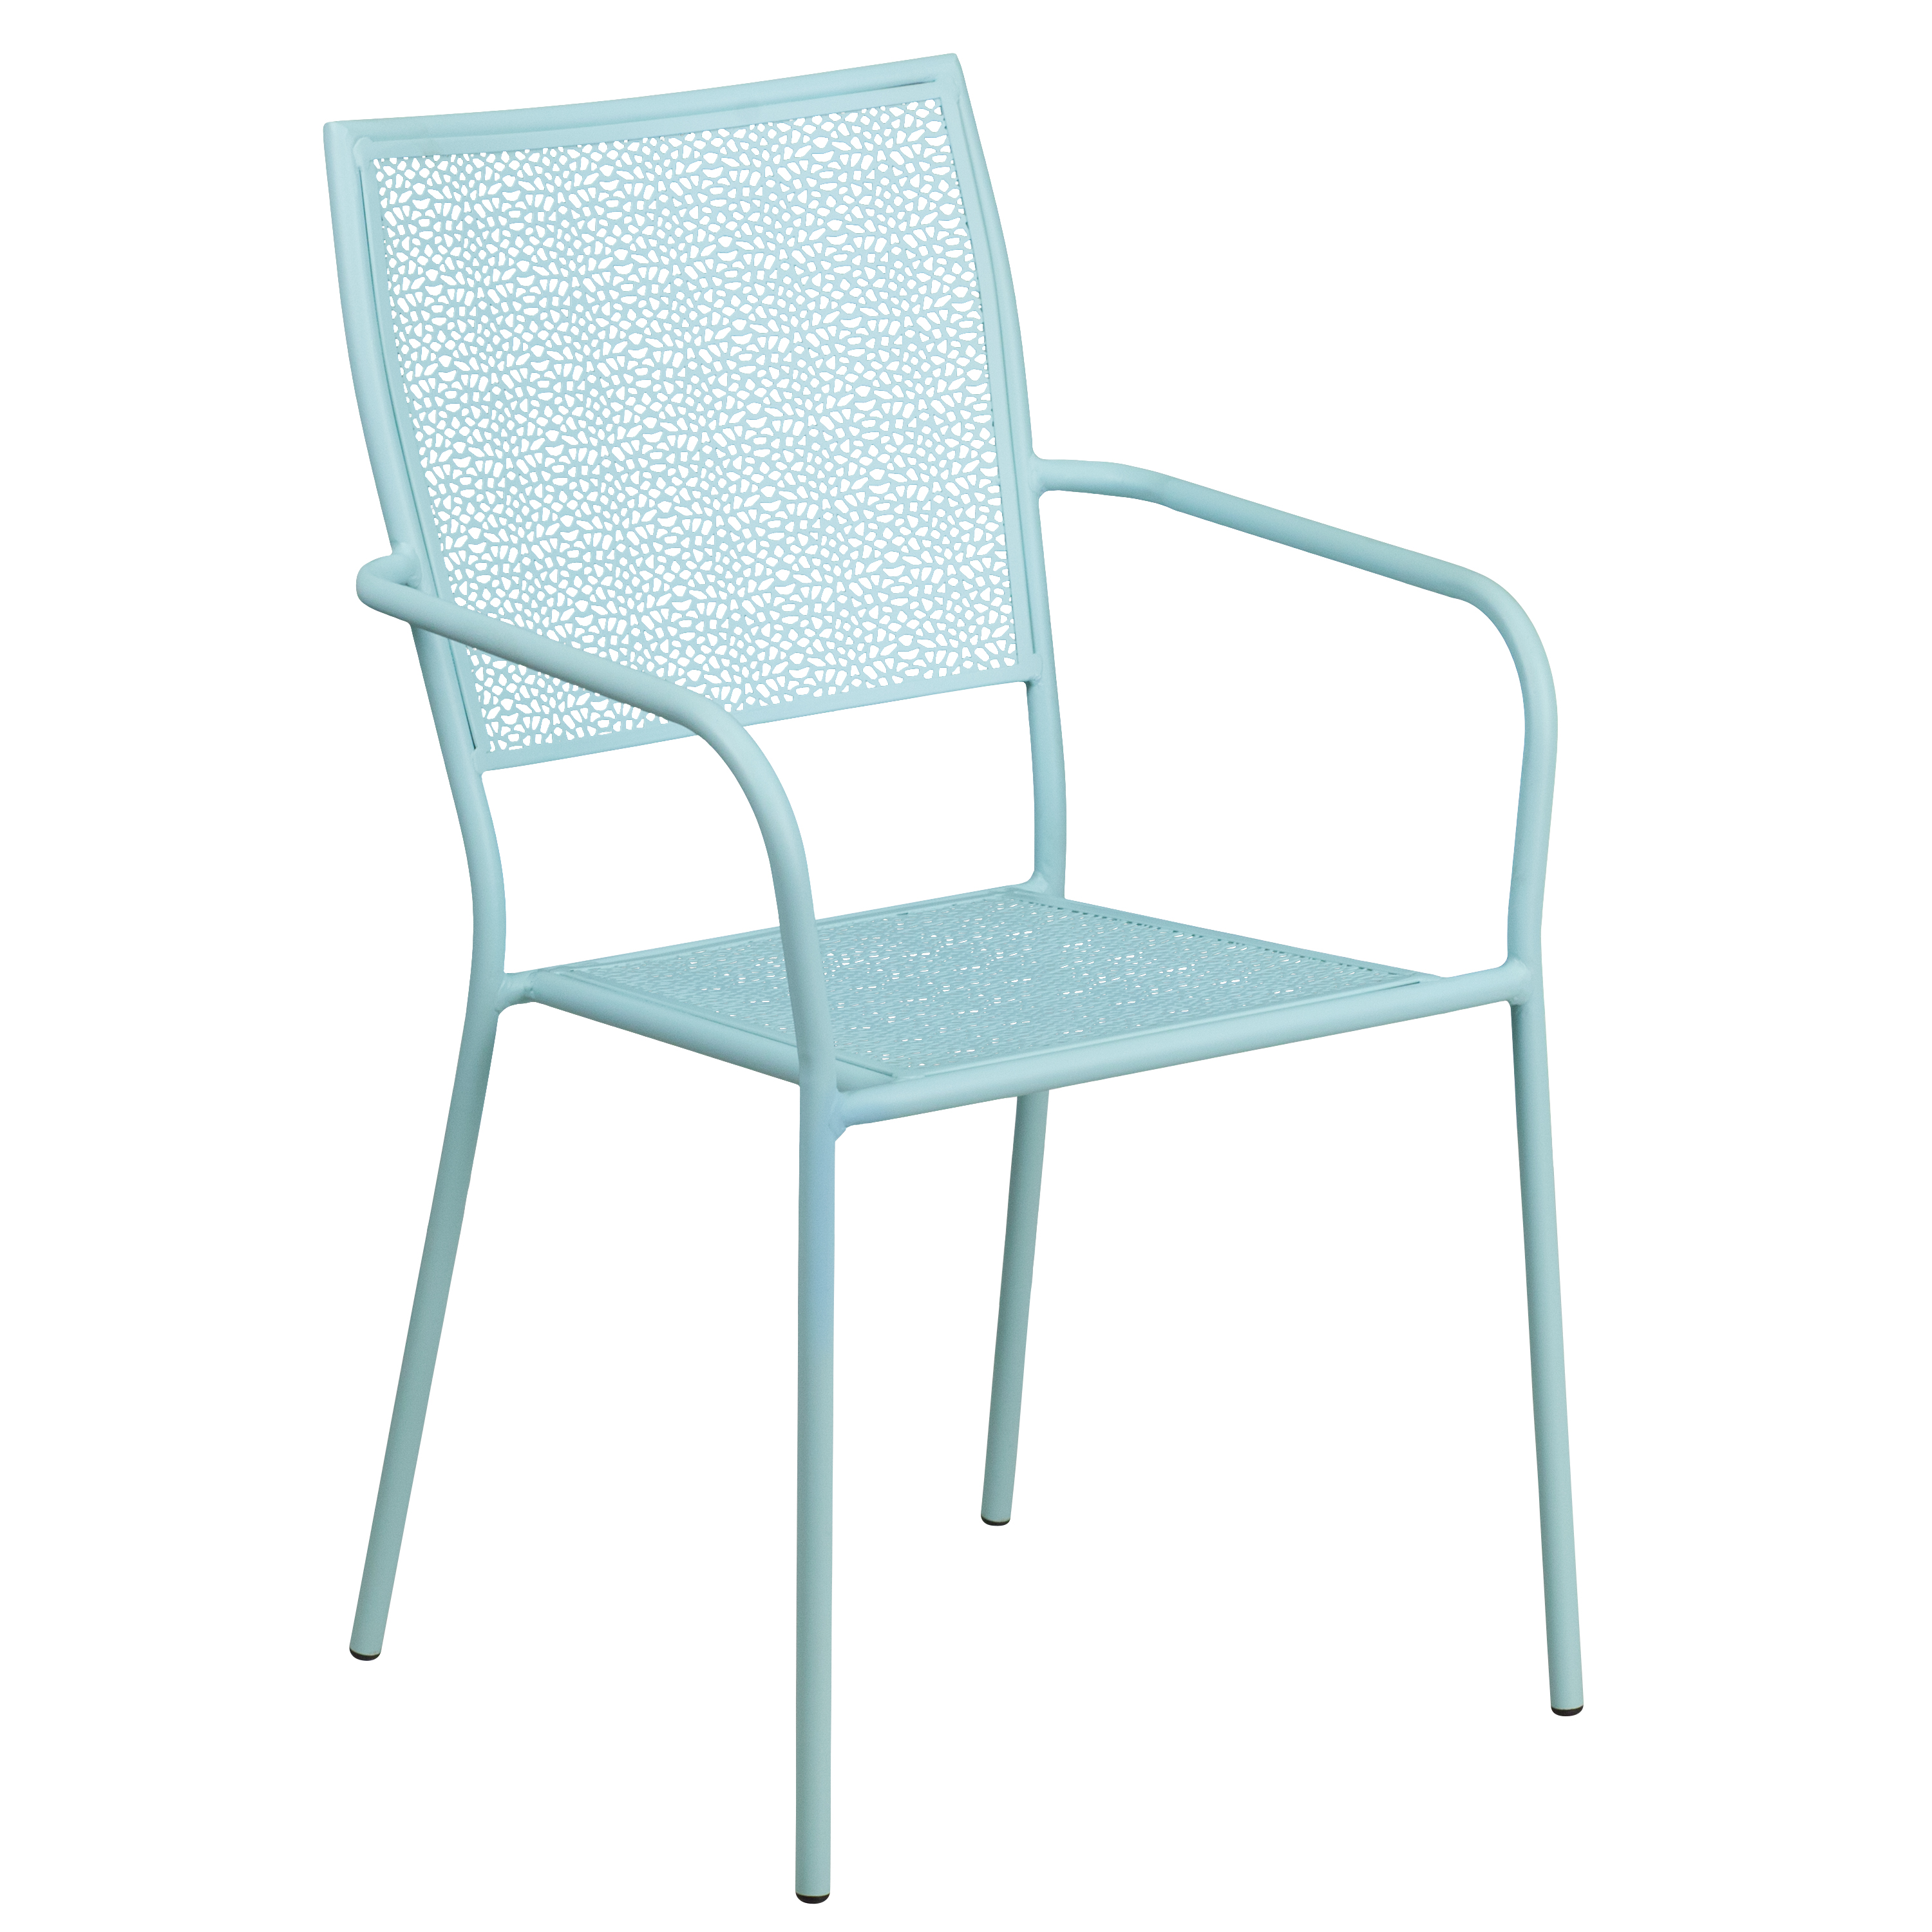 Flash Furniture Oia Commercial Grade 35.5" Square Sky Blue Indoor-Outdoor Steel Patio Table Set with 4 Square Back Chairs - image 5 of 5